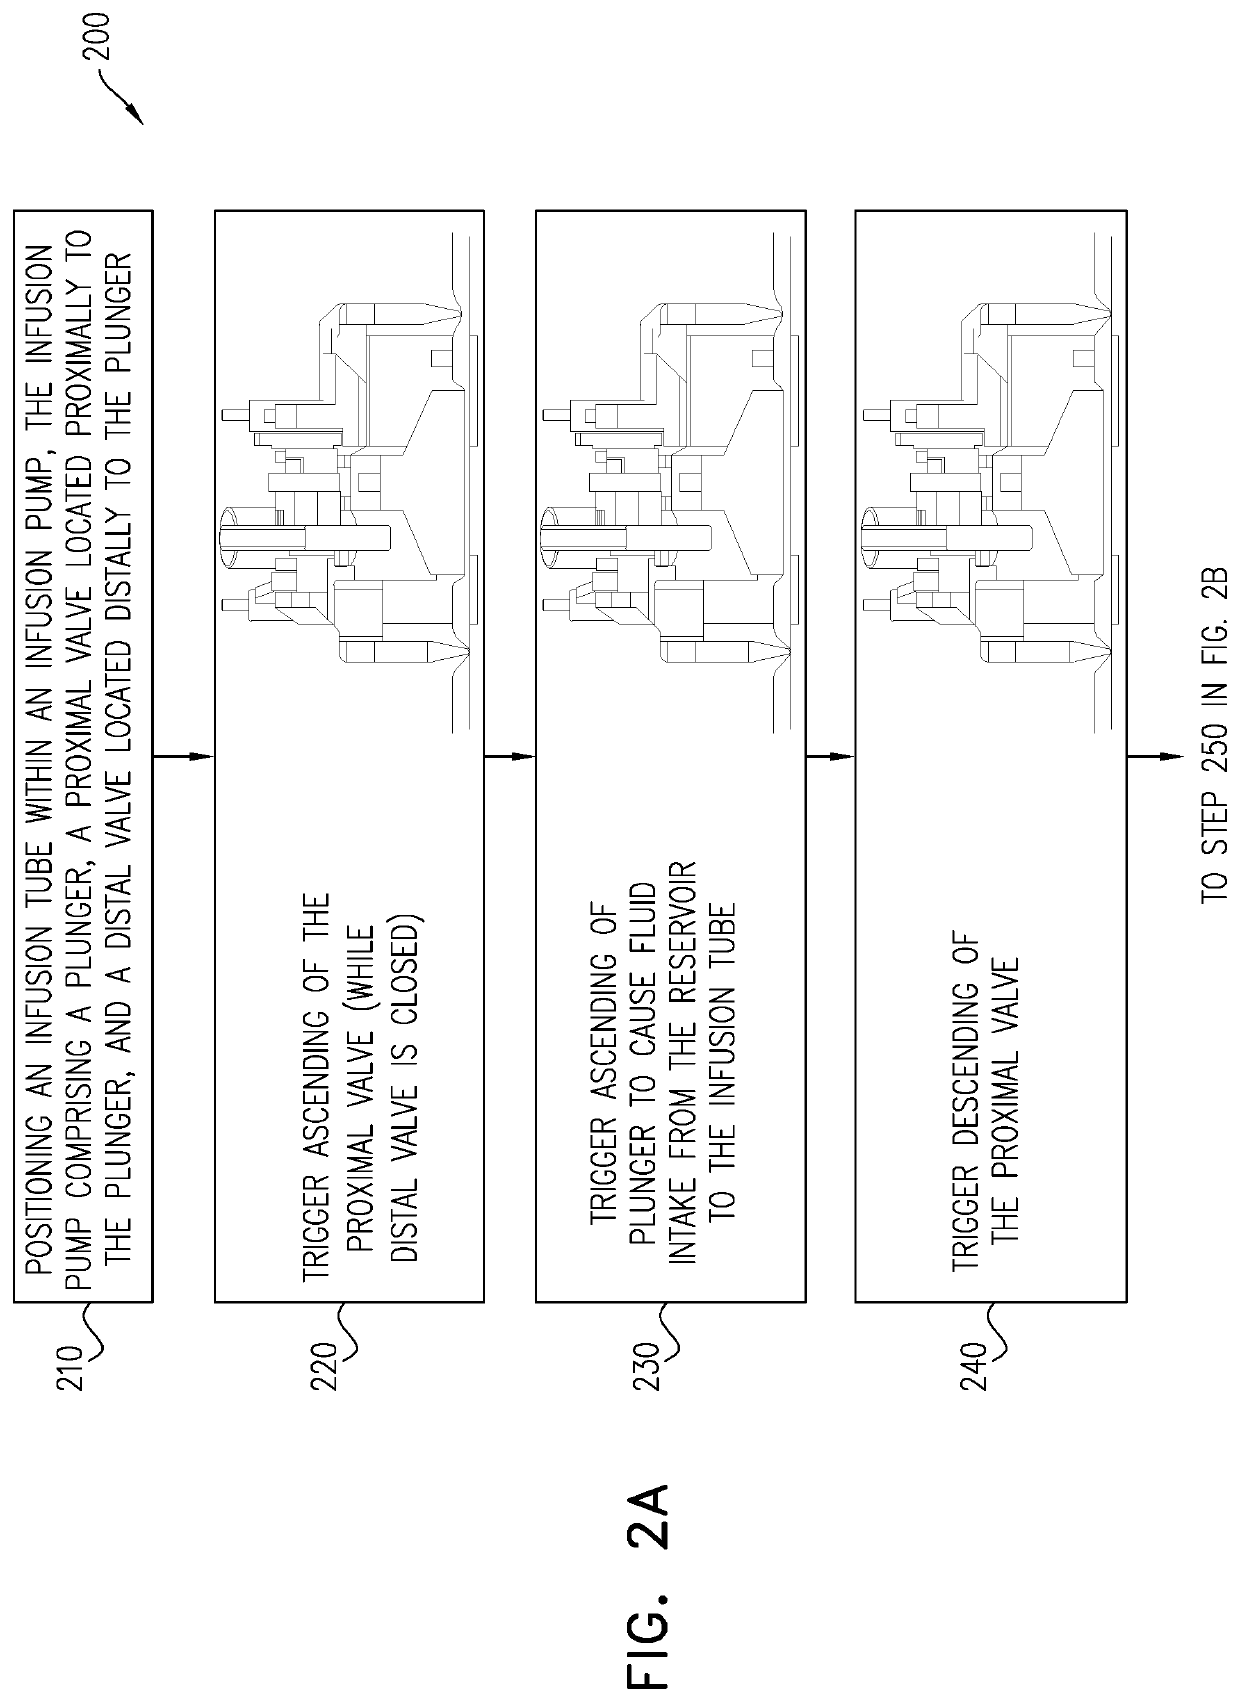 Infusion pump with valve compensation